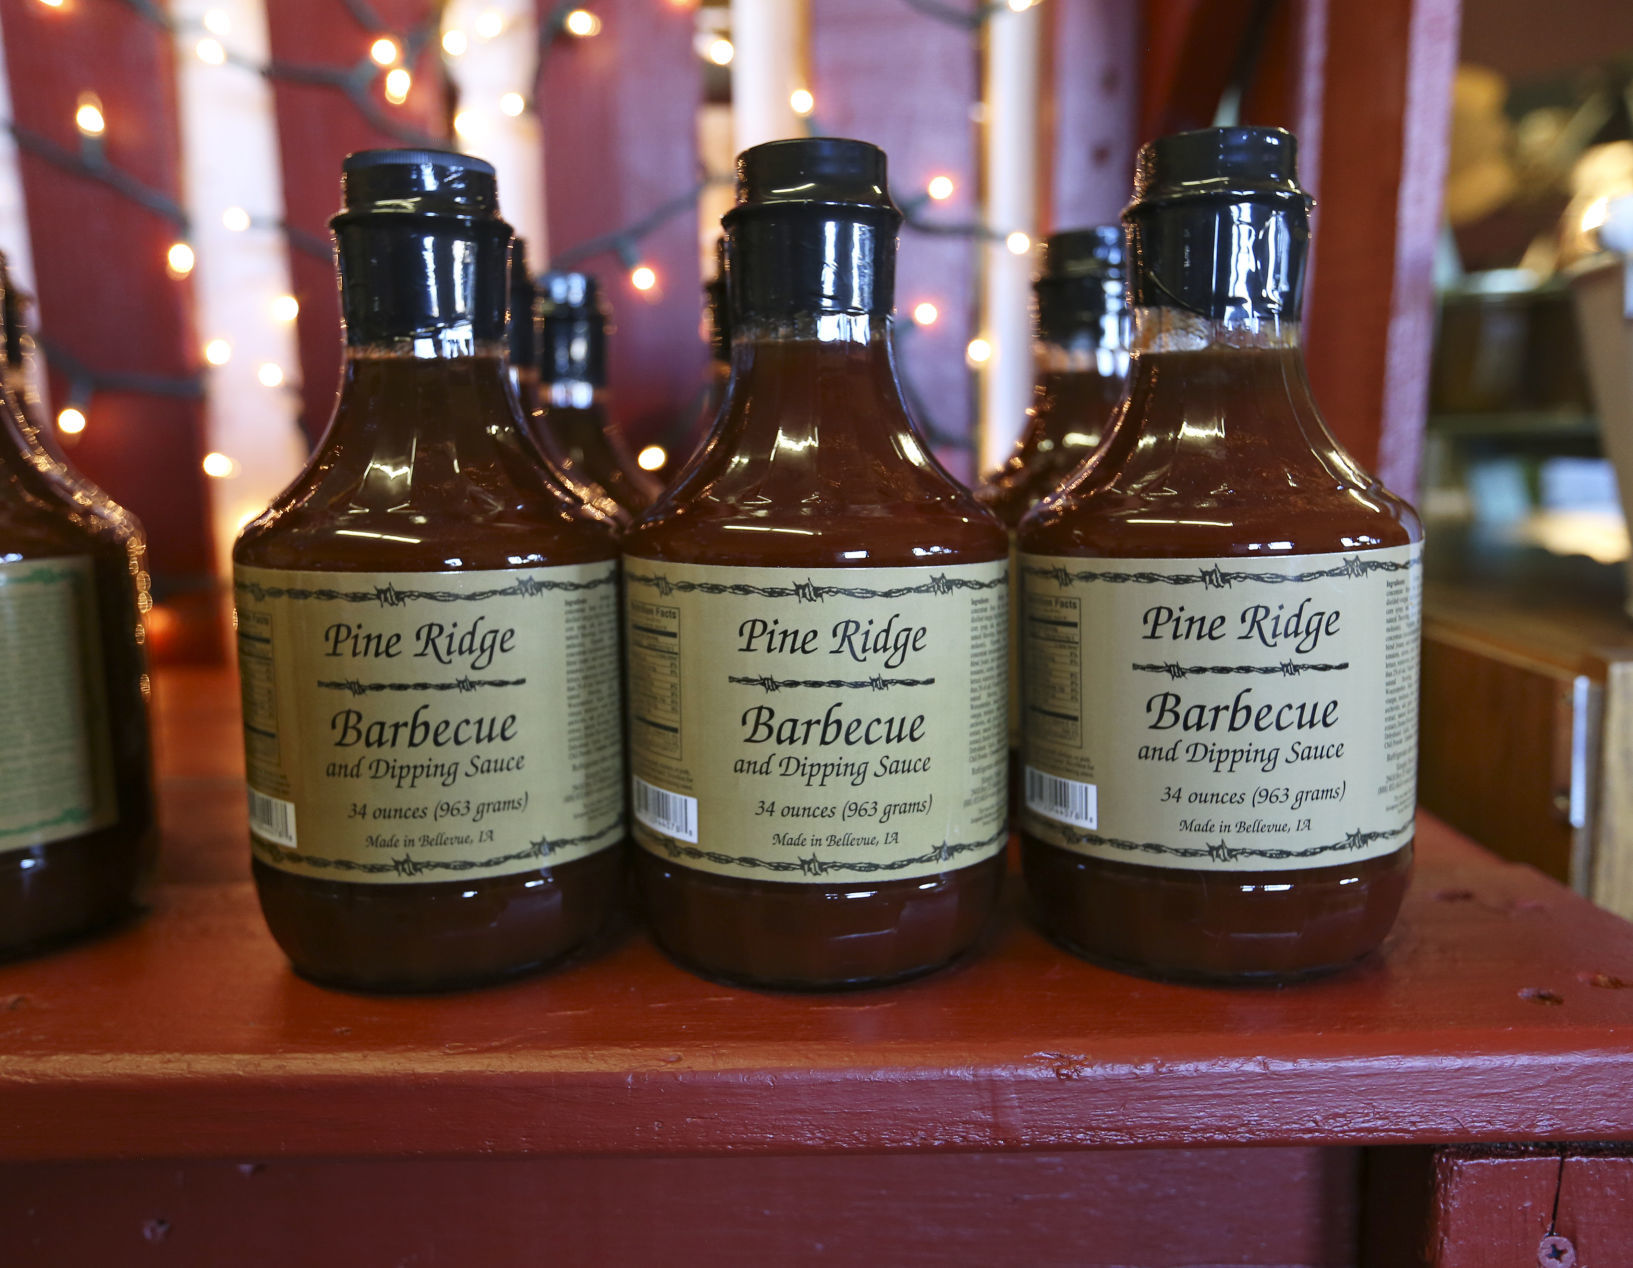 Pine Ridge Barbecue and Dipping Sauce sold at Simply Parker’s in Bellevue, Iowa.    PHOTO CREDIT: EILEEN MESLAR